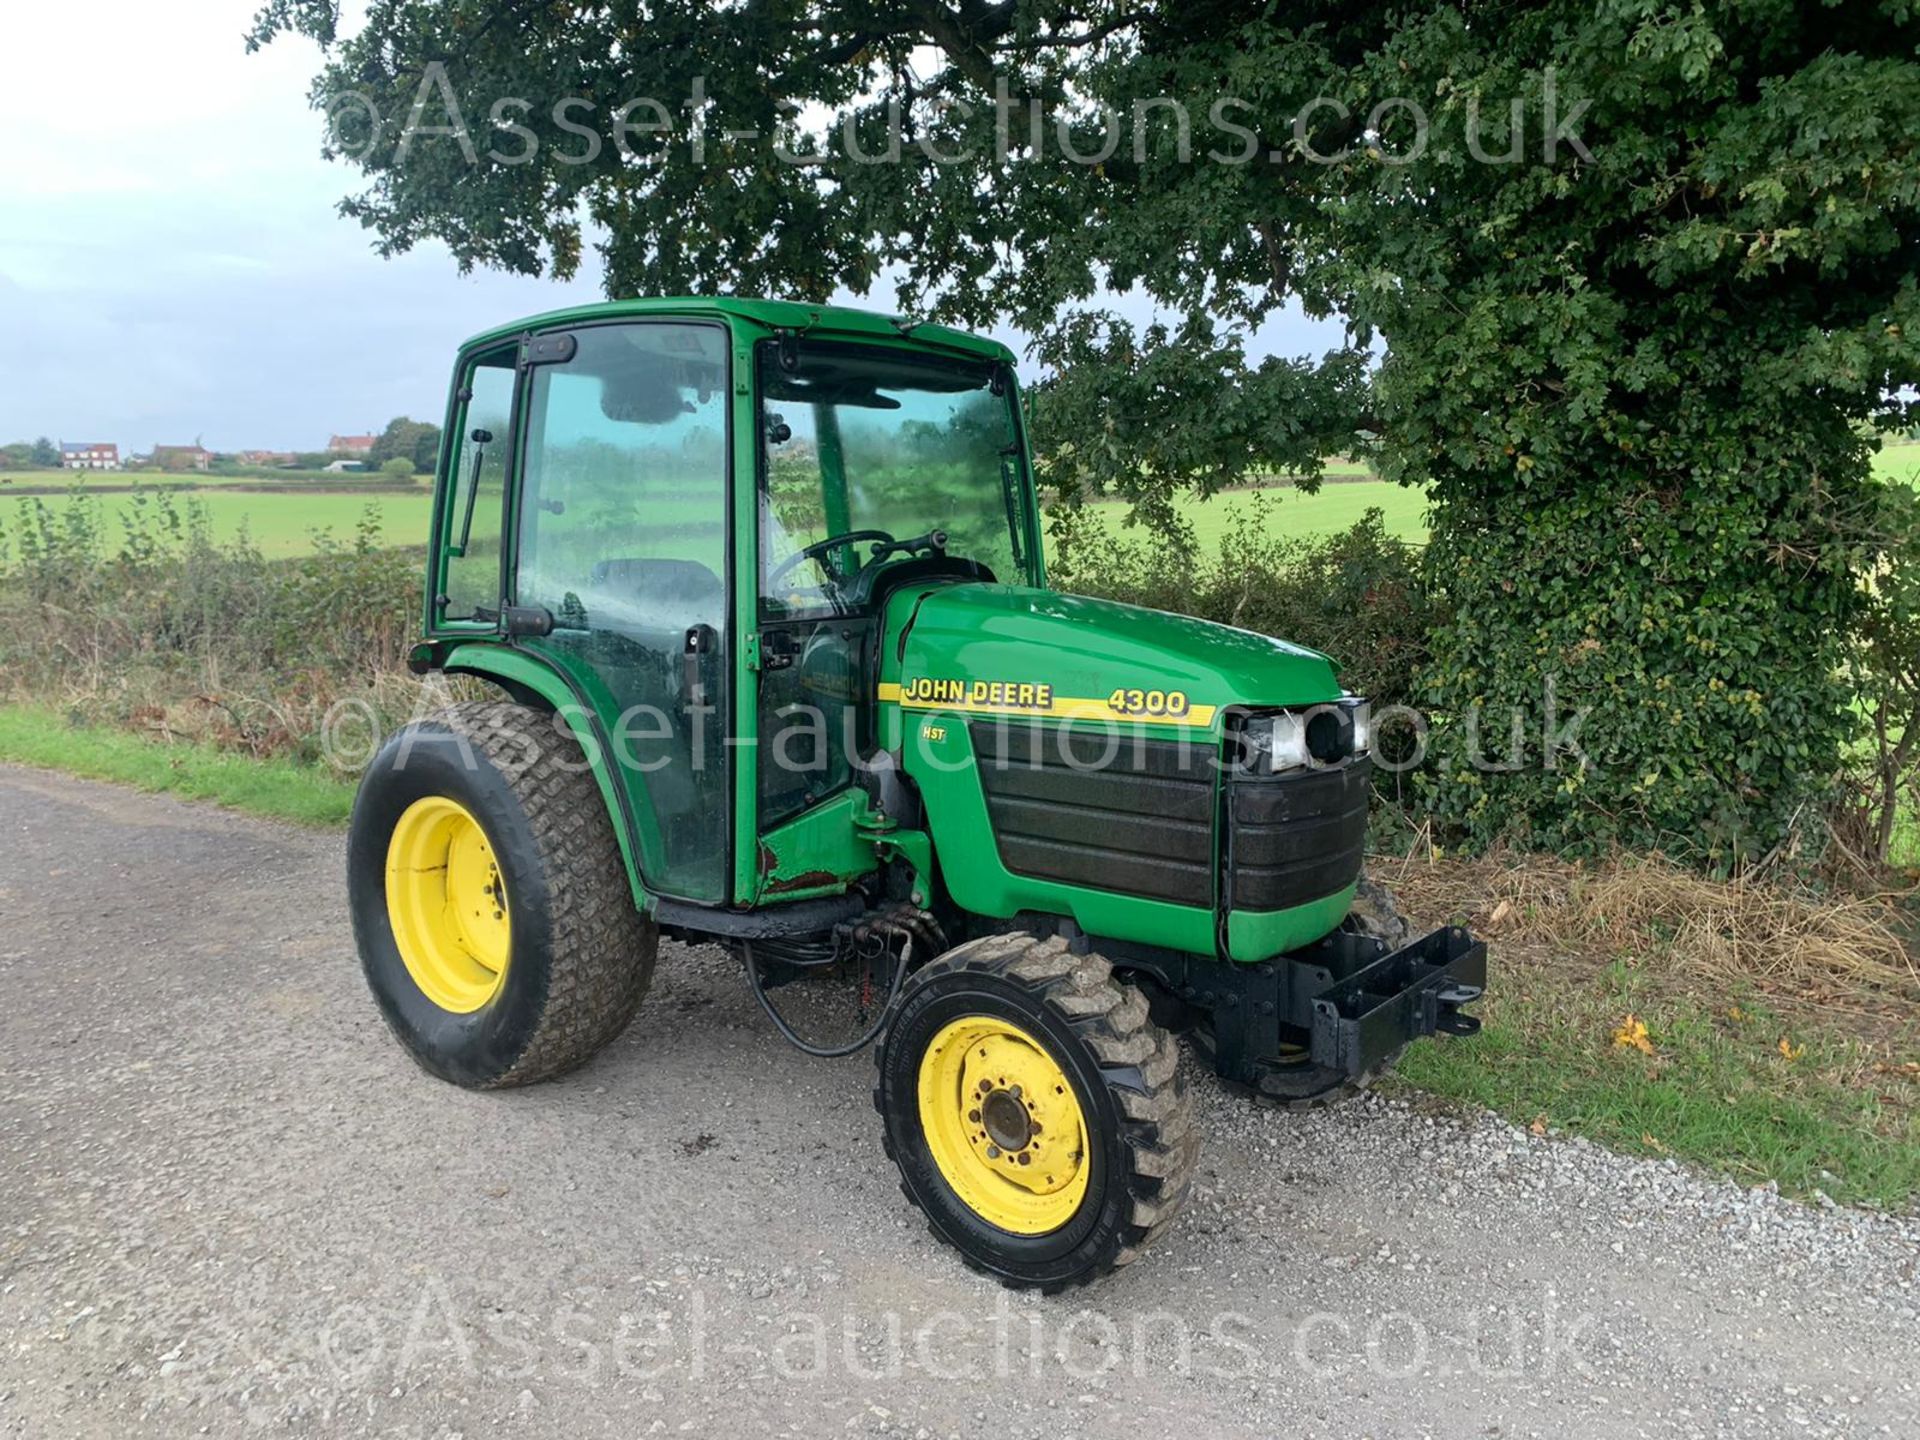 JOHN DEERE 4300 32hp 4WD COMPACT TRACTOR, RUNS DRIVES AND WORKS, CABBED, REAR TOW, ROAD KIT - Image 3 of 9